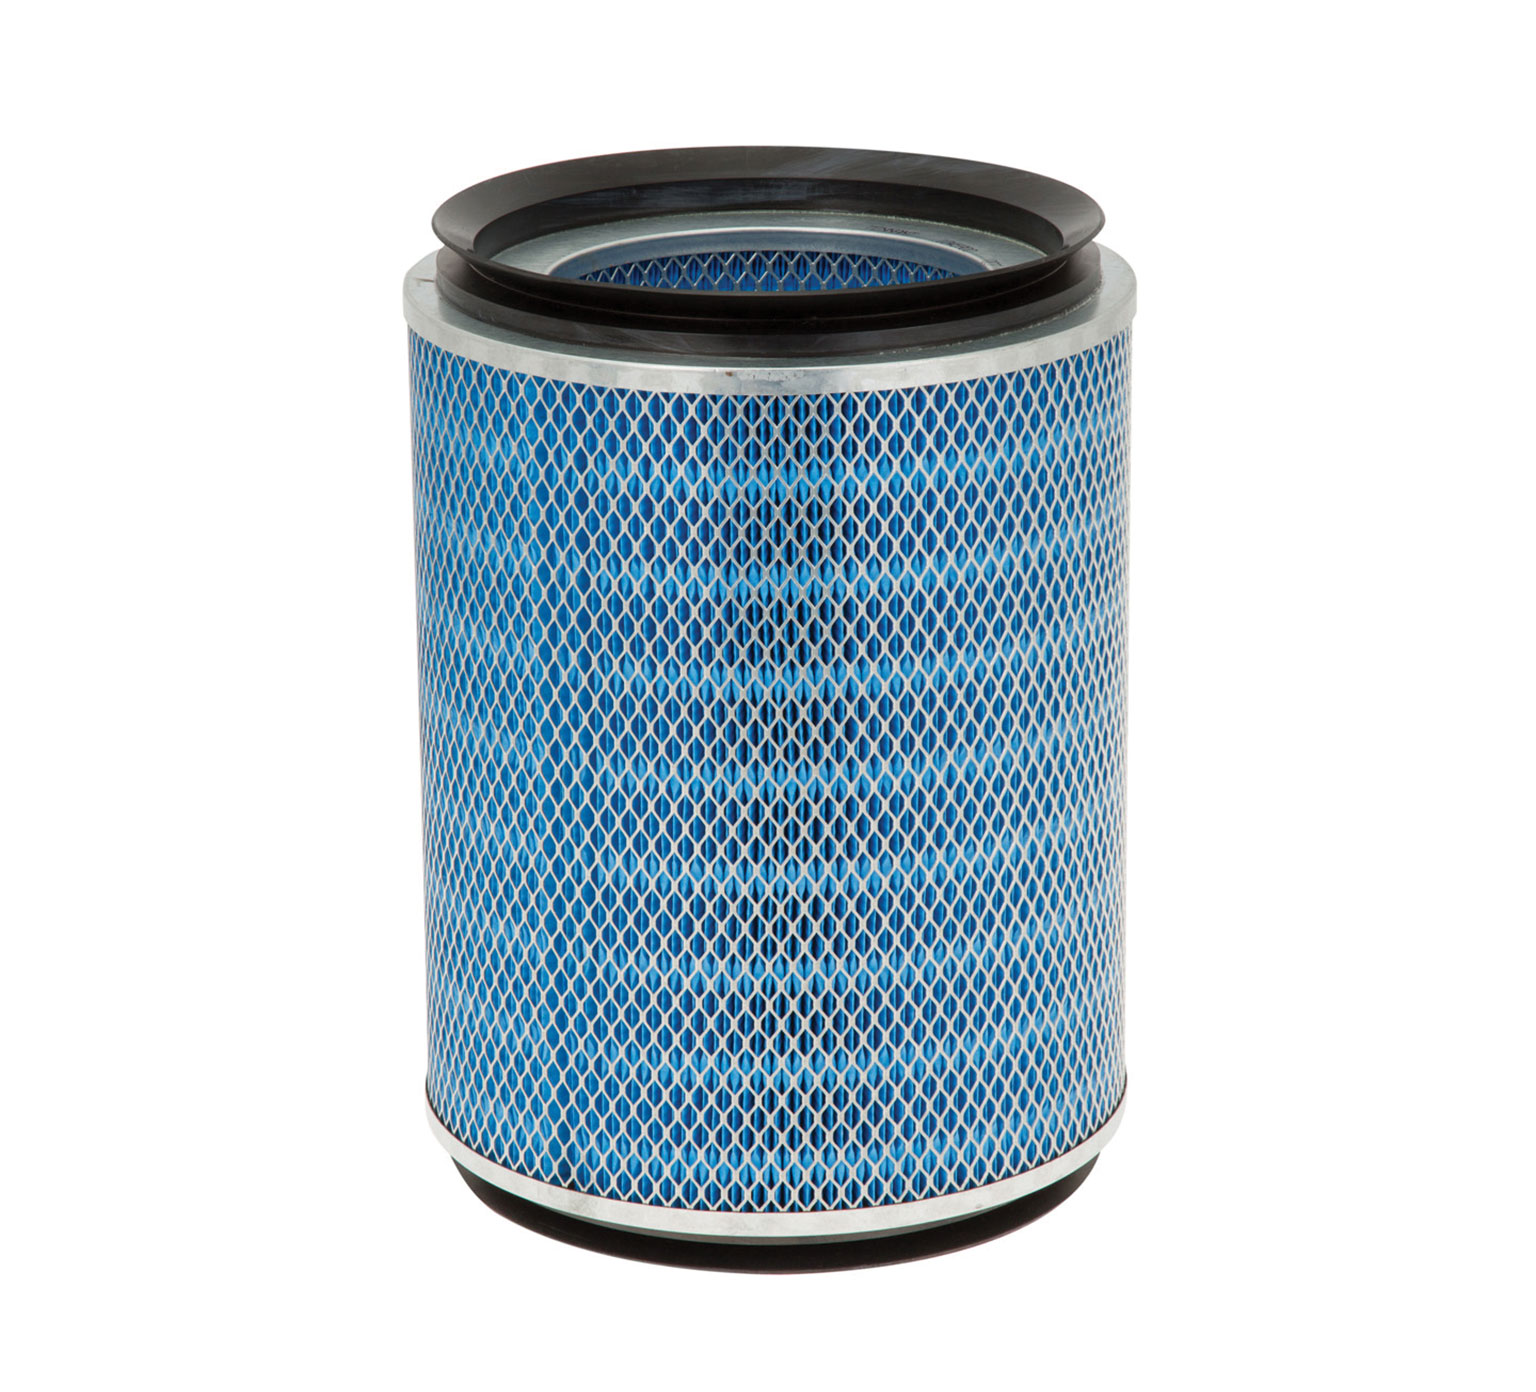 1045900 Canister Filter &#8211; 11.1 x 13.1 in alt 1